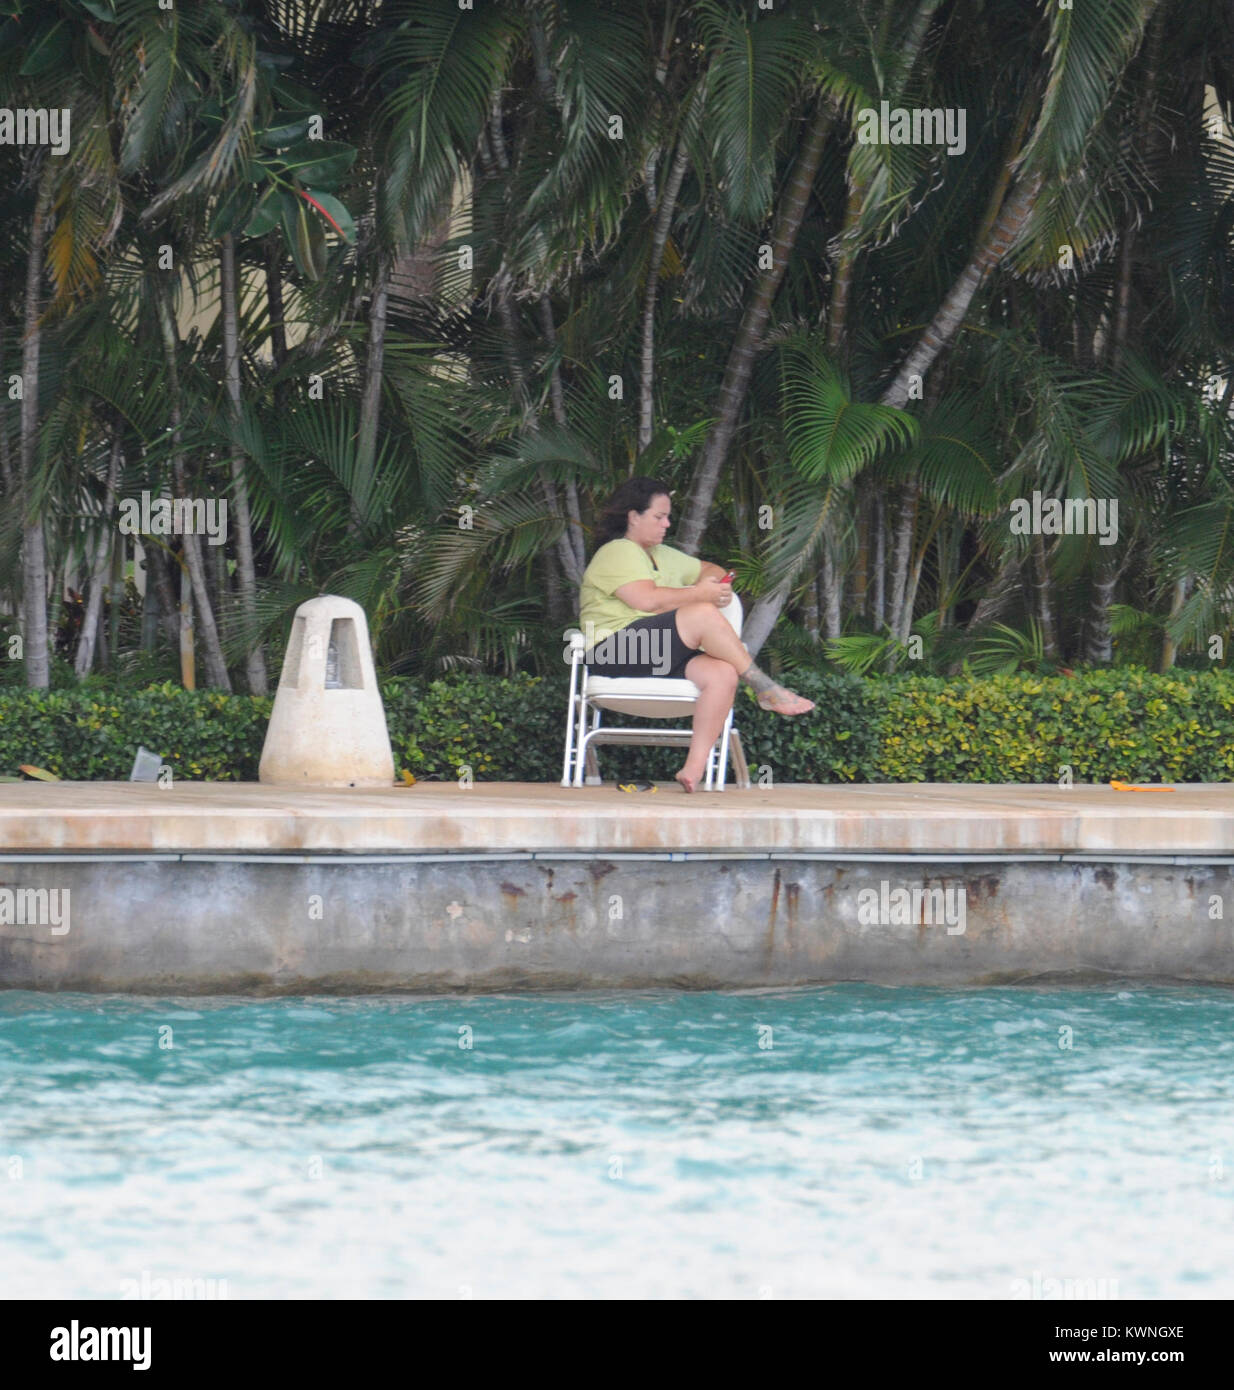 MIAMI BEACH, FL - JUNE 11:  (EXCLUSIVE COVERAGE) Rosie O'Donnell (wearing no make up and a bandage on her foot.)  Enjoys her day as she sits on her dock texting from her estate in Miami. Roseann "Rosie" O'Donnell (born March 21, 1962) is an American stand-up comedienne, actress, singer, author and media personality. She has also been a magazine editor and continues to be a celebrity blogger, LGBT rights activist; television producer and collaborative partner in the LGBT family vacation company R Family Vacations.   On June 11, 2011 in Miami Beach, Florida    People:  Rosie O'Donnell Stock Photo